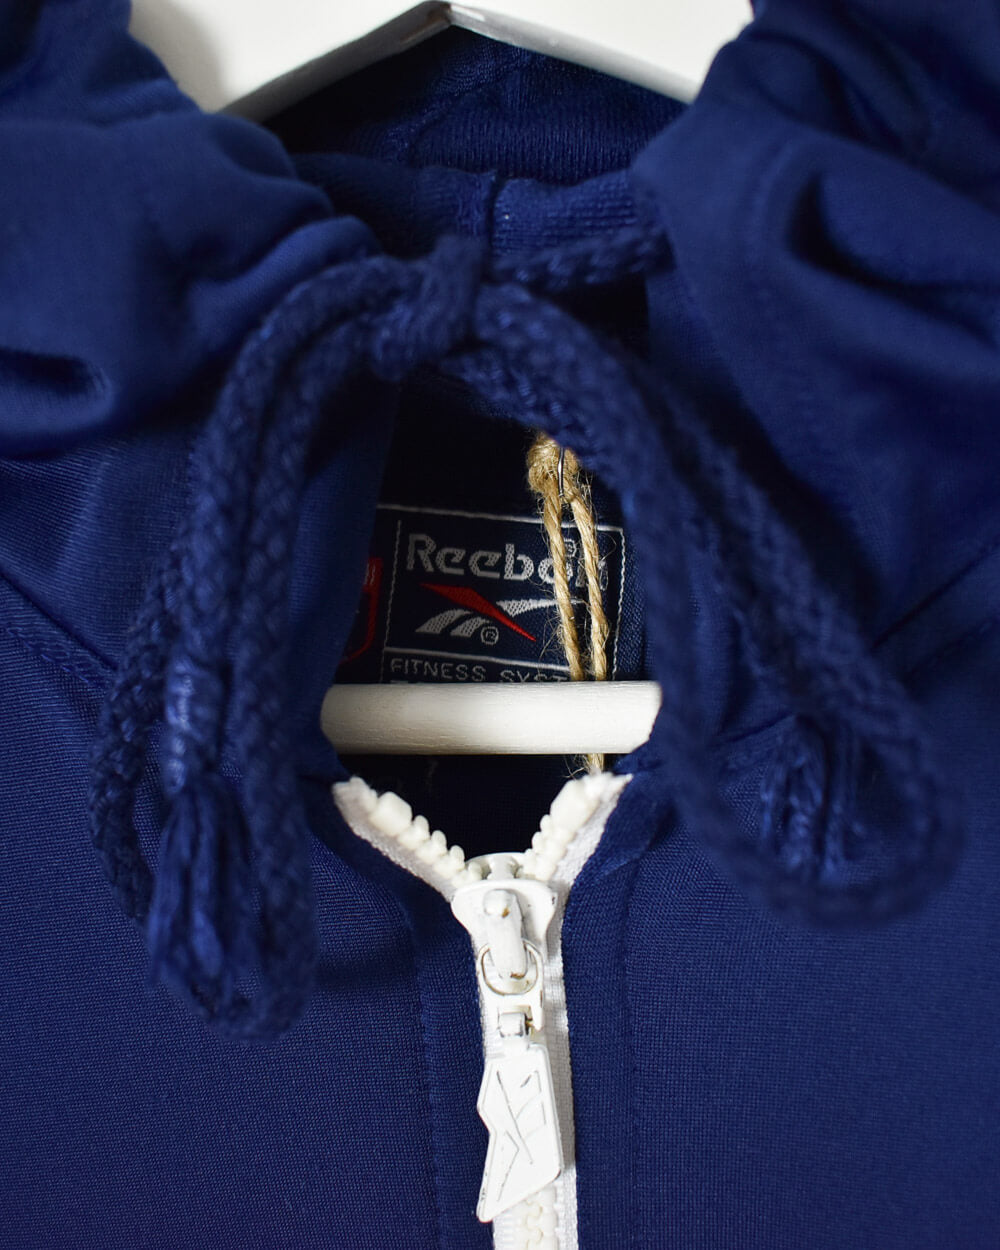 Navy Reebok Hooded Tracksuit Top - XX-Small